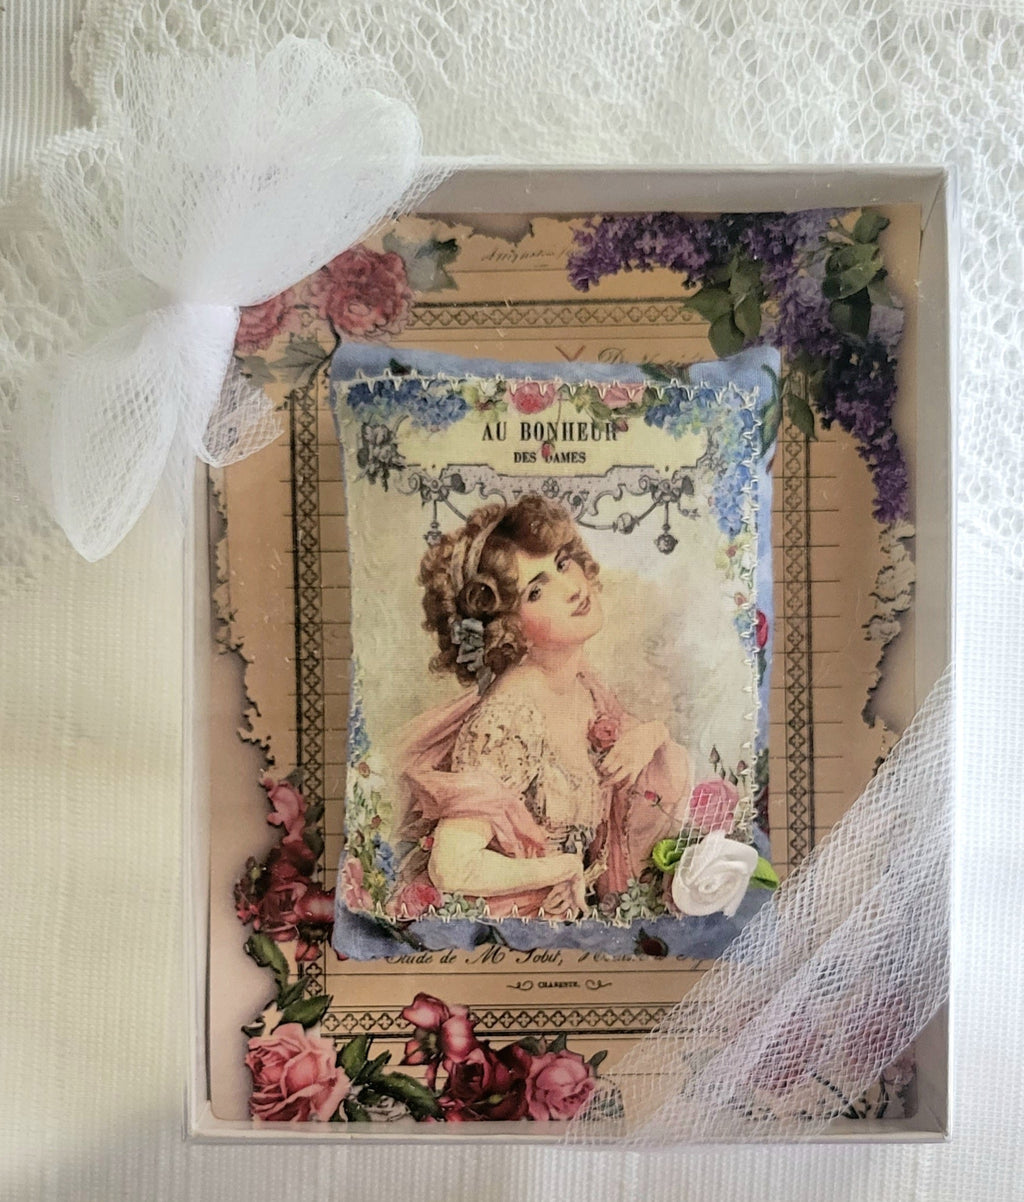 Fancy French Lovely Lavender Scented Gift Boxed Sachet - Antoinette - One of a Kind!-Roses And Teacups